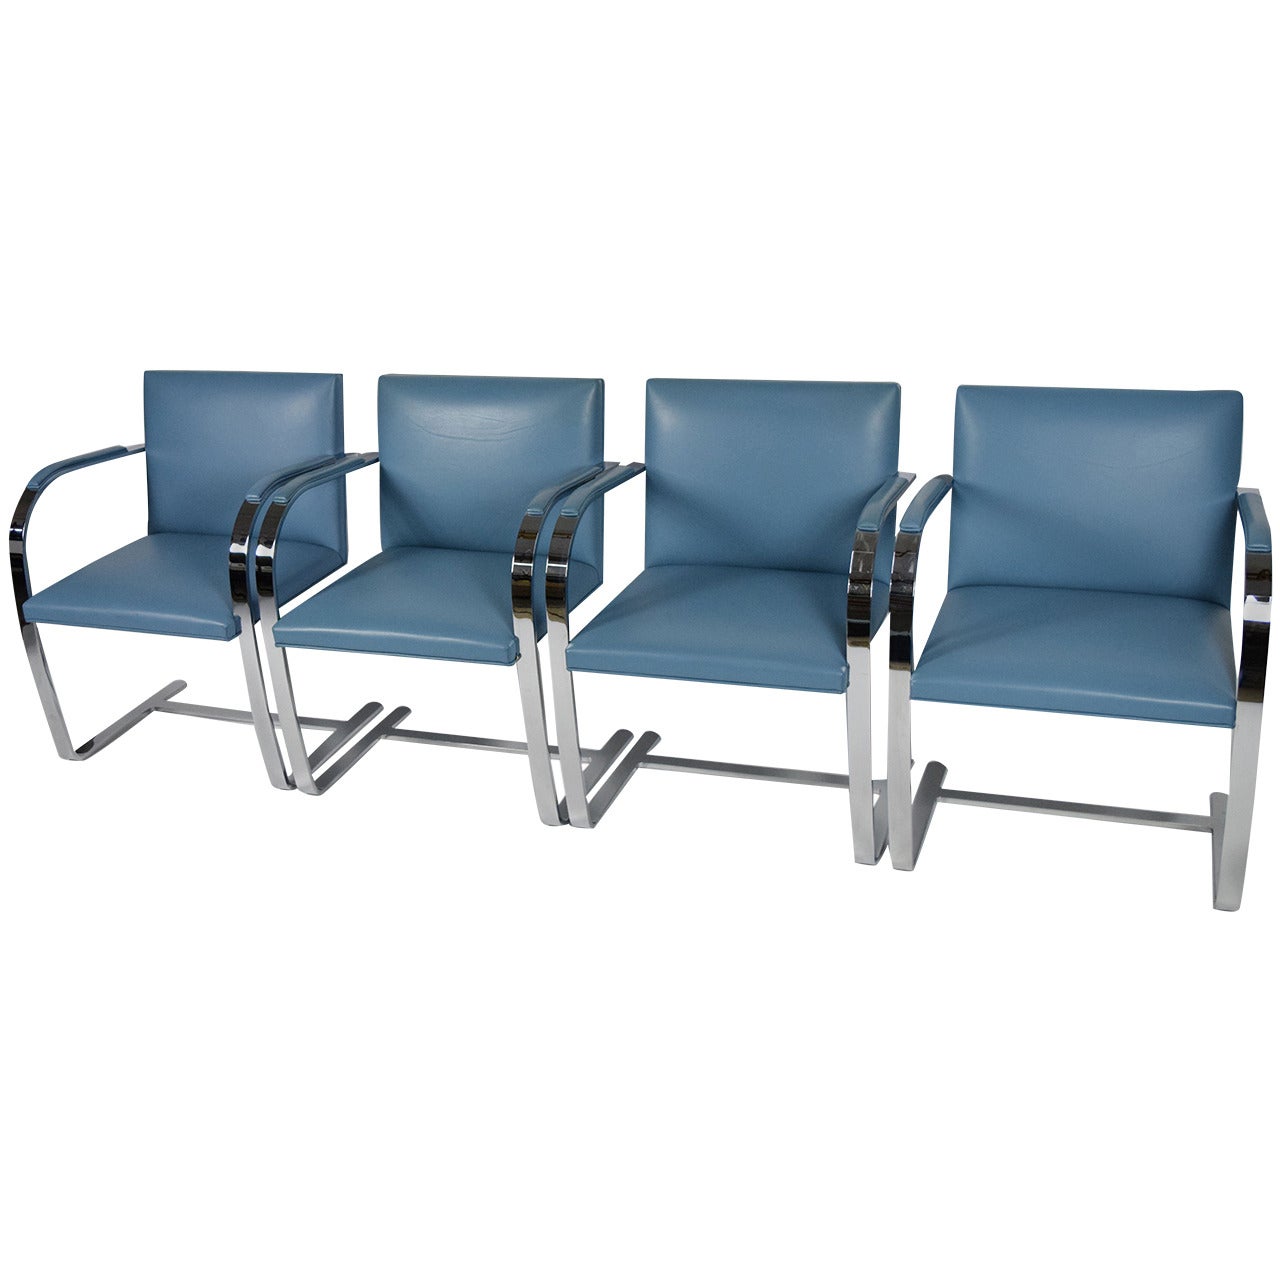 Set of Four Knoll Flat Bar Brno Chairs in Blue Leather